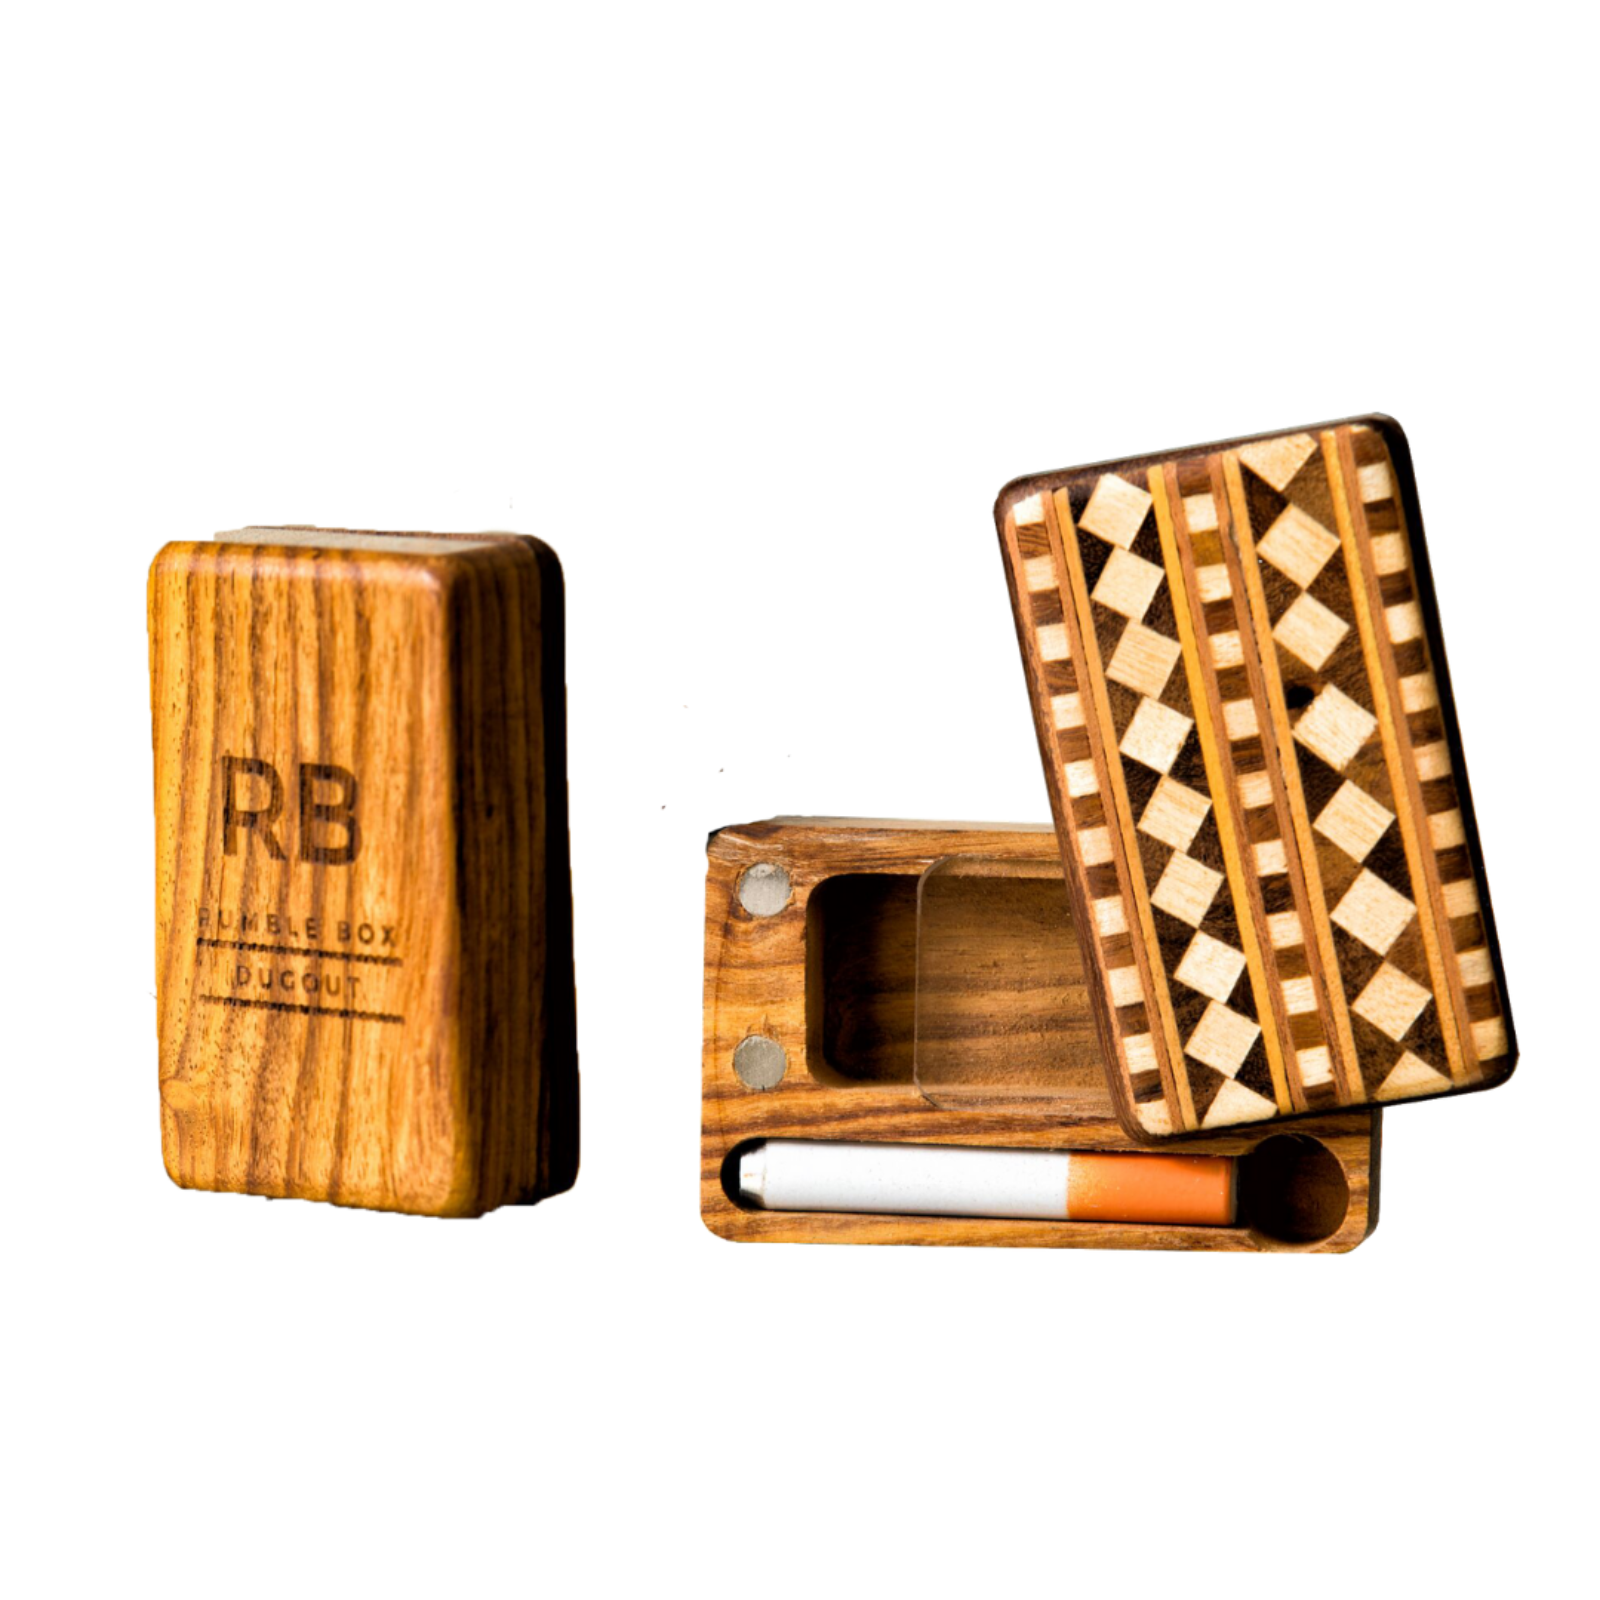 Rumble Box Supplies: The Side Swivel Rumble Box Dugout | Leafly